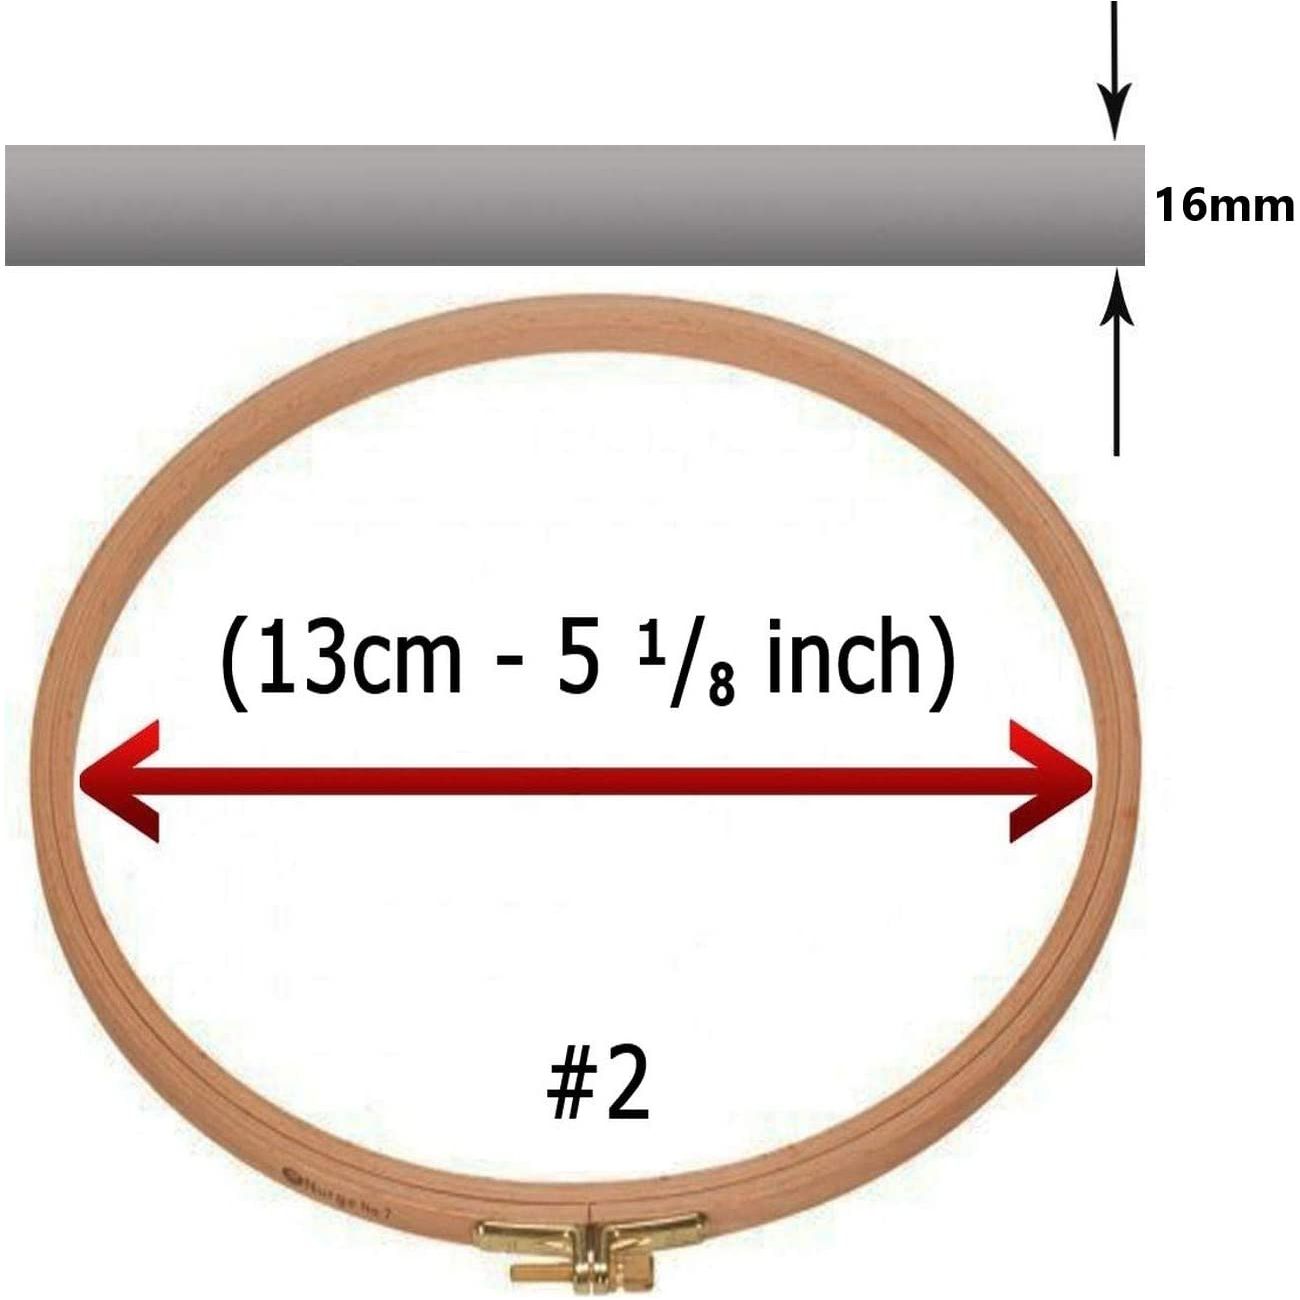 natural beech wood round quilt 16mm embroidery hoop 13cm - 5 ¹/₈ in